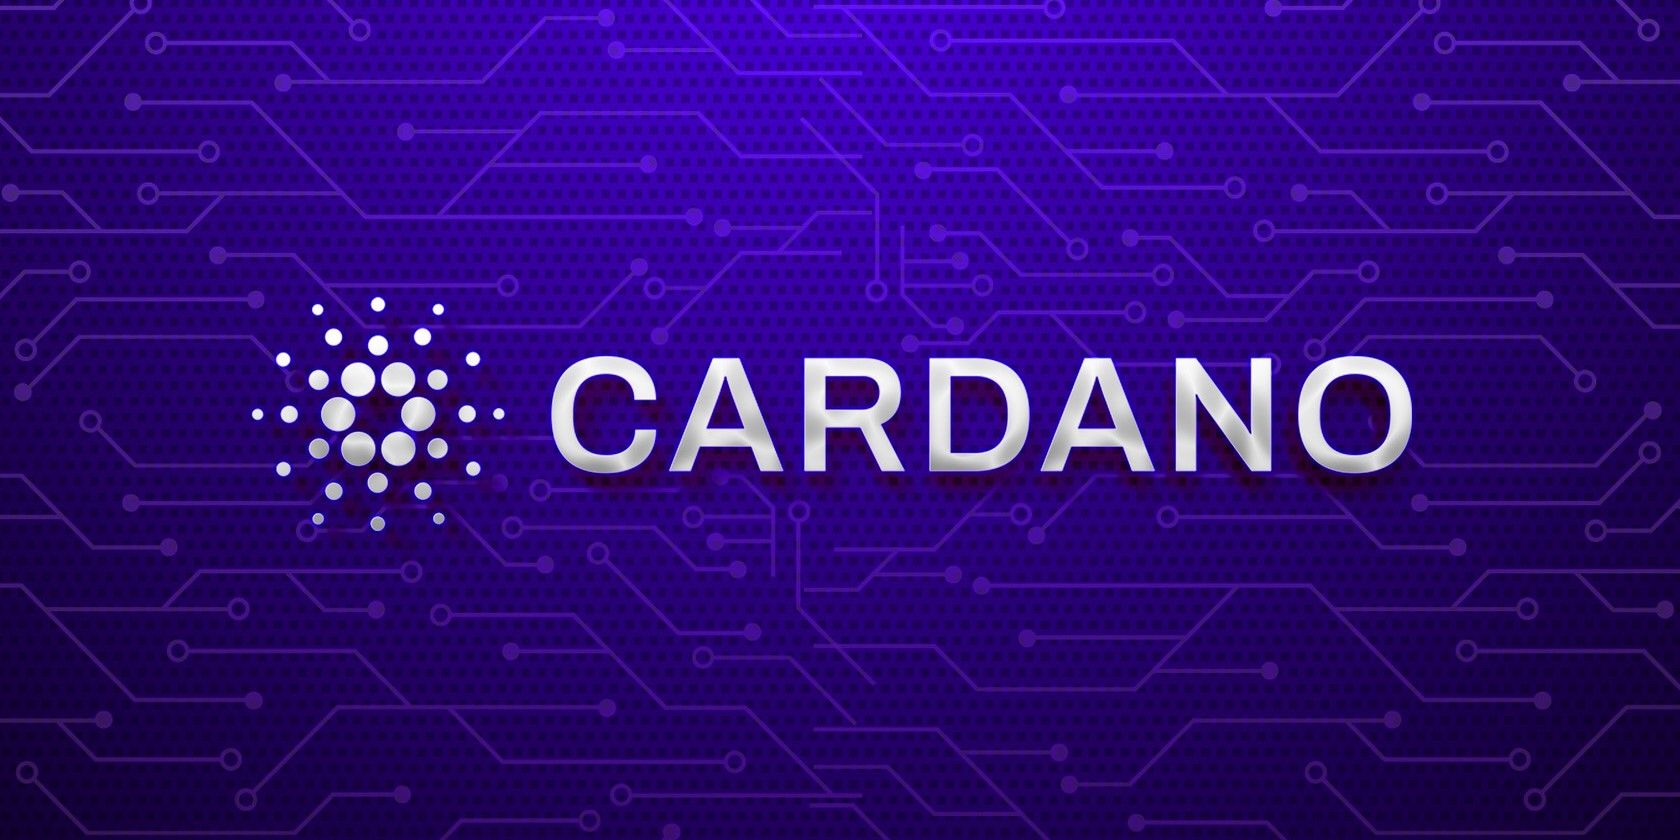 Cardano text on blue background